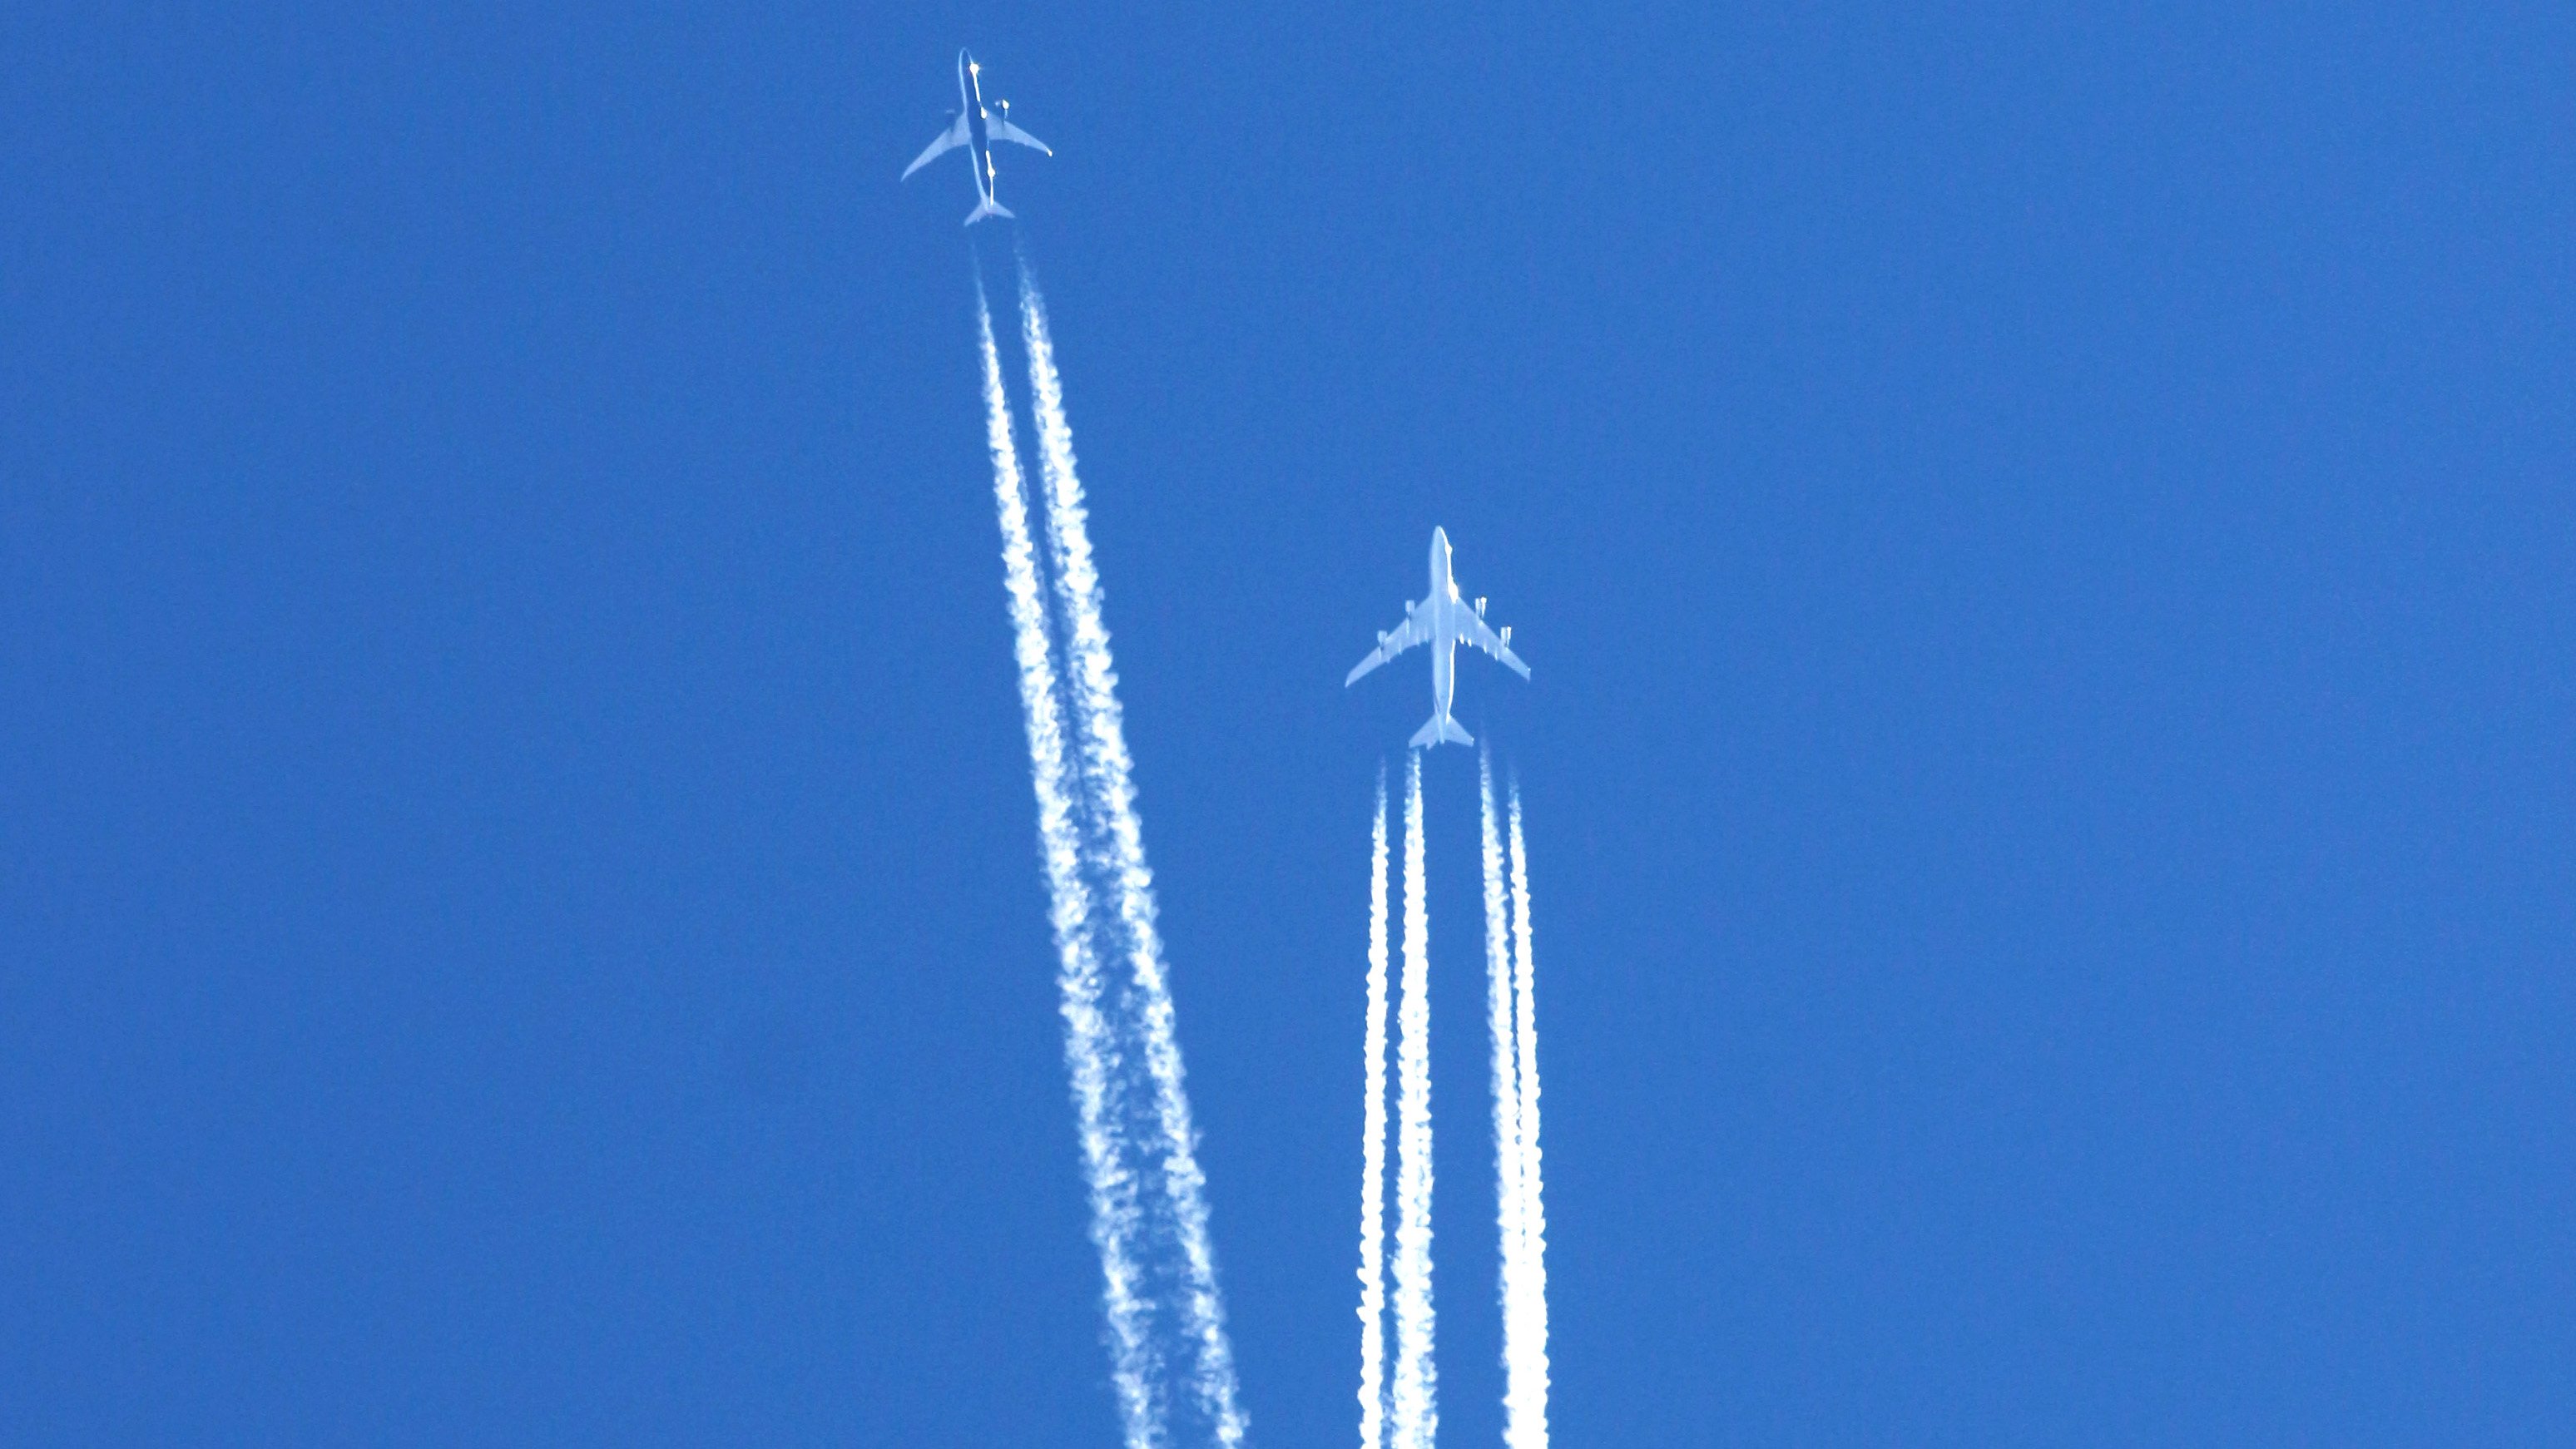 slipstream contrails aircraft airplanes sky fly miss cross